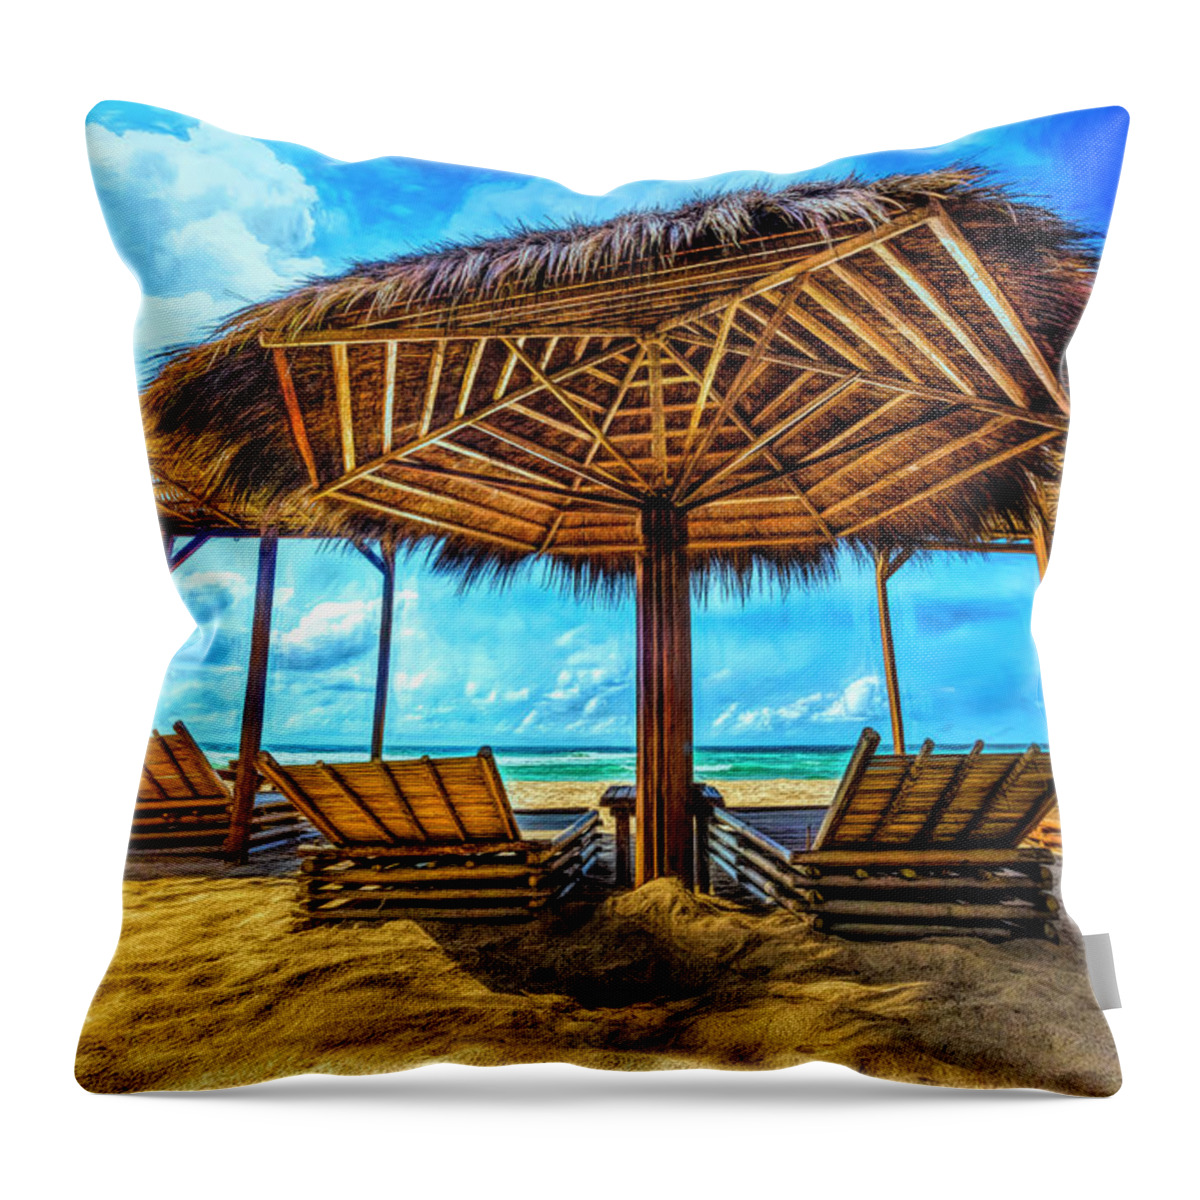 African Throw Pillow featuring the photograph A Little Beach Time by Debra and Dave Vanderlaan